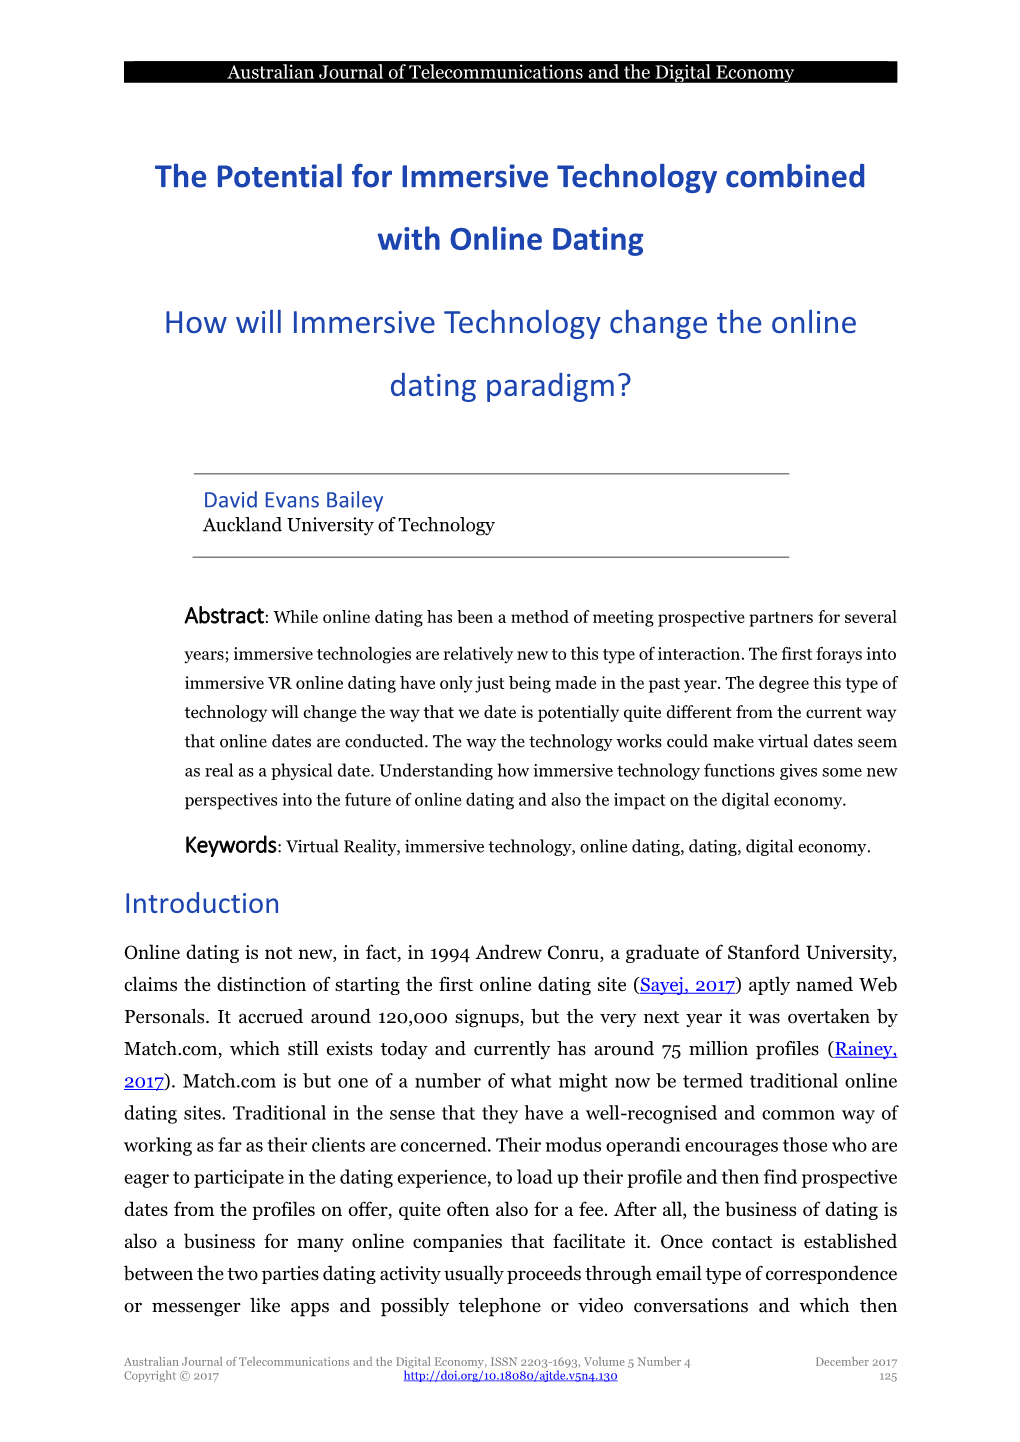 The Potential for Immersive Technology Combined with Online Dating